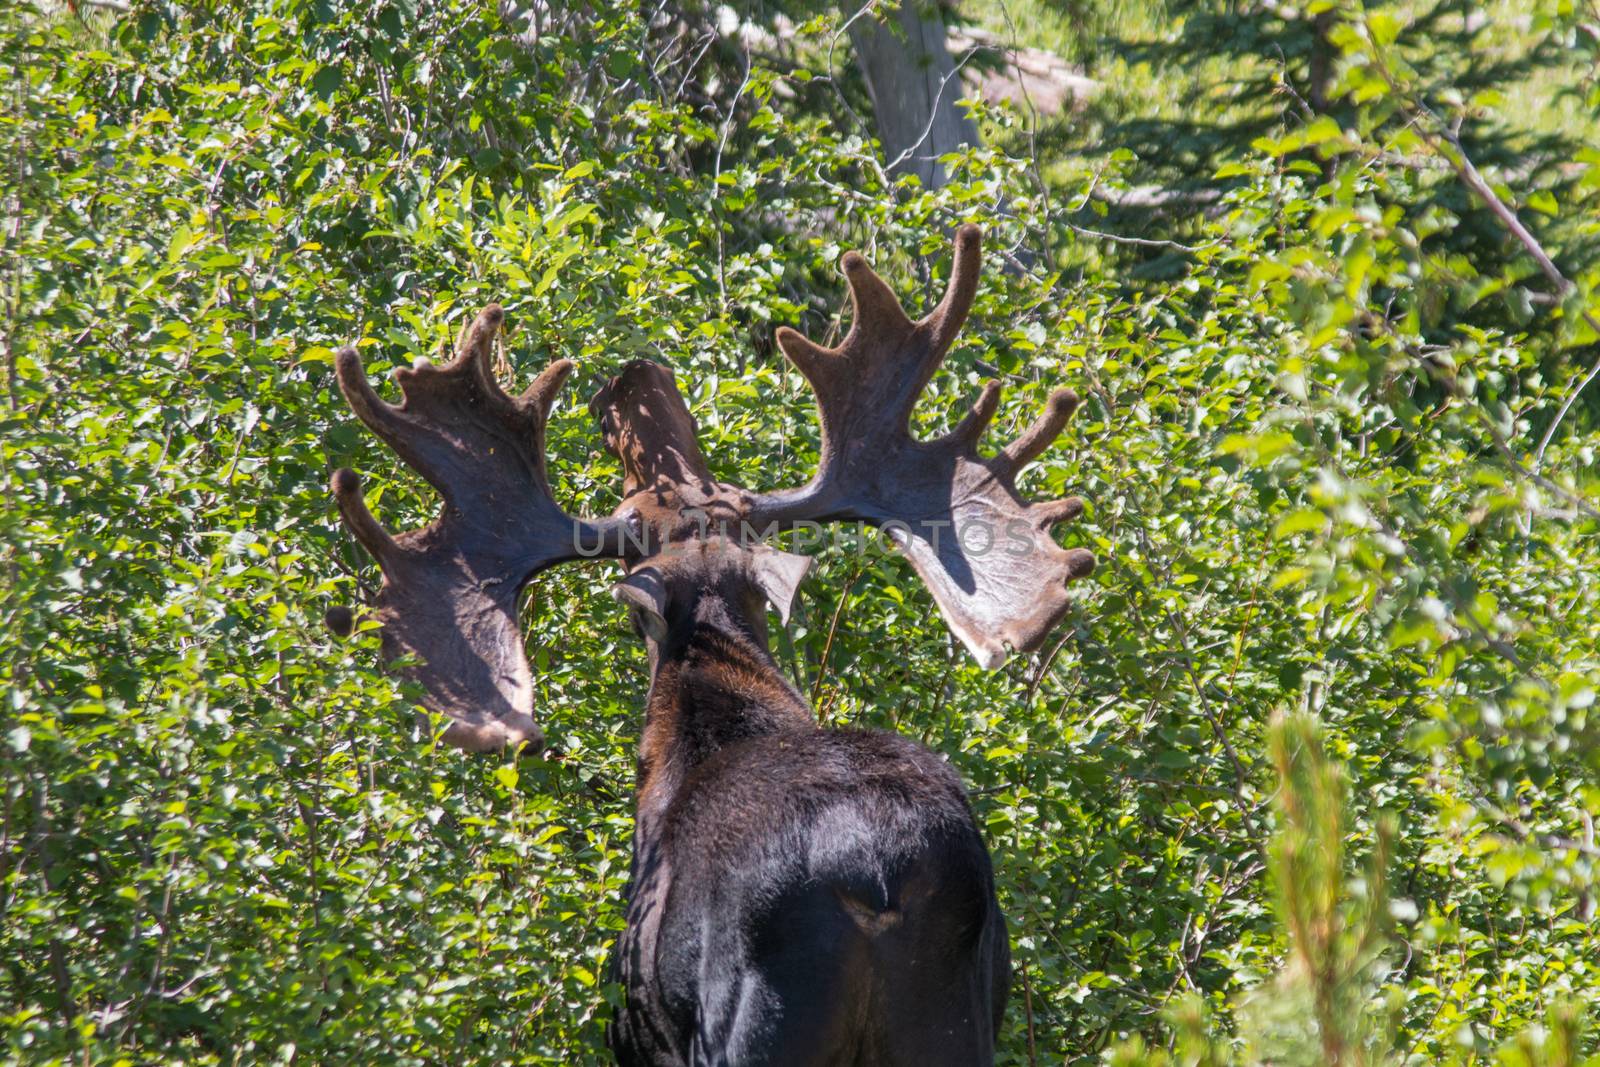 This Bull Moose in Rocky Mountain National Park has a seriously big rack.  Female moose partially choose their mates based on the size of his antlers. The males also use their antlers to fight rivals, although they will often display their rack to try to discourage competition.   
I came across this moose while hiking through the Wild Basin Area.  I was able to spend about an hour and a half with him, taking photographs and watching him eat. More pictures and the story of my encounter with him are available at SheaOliver.com.